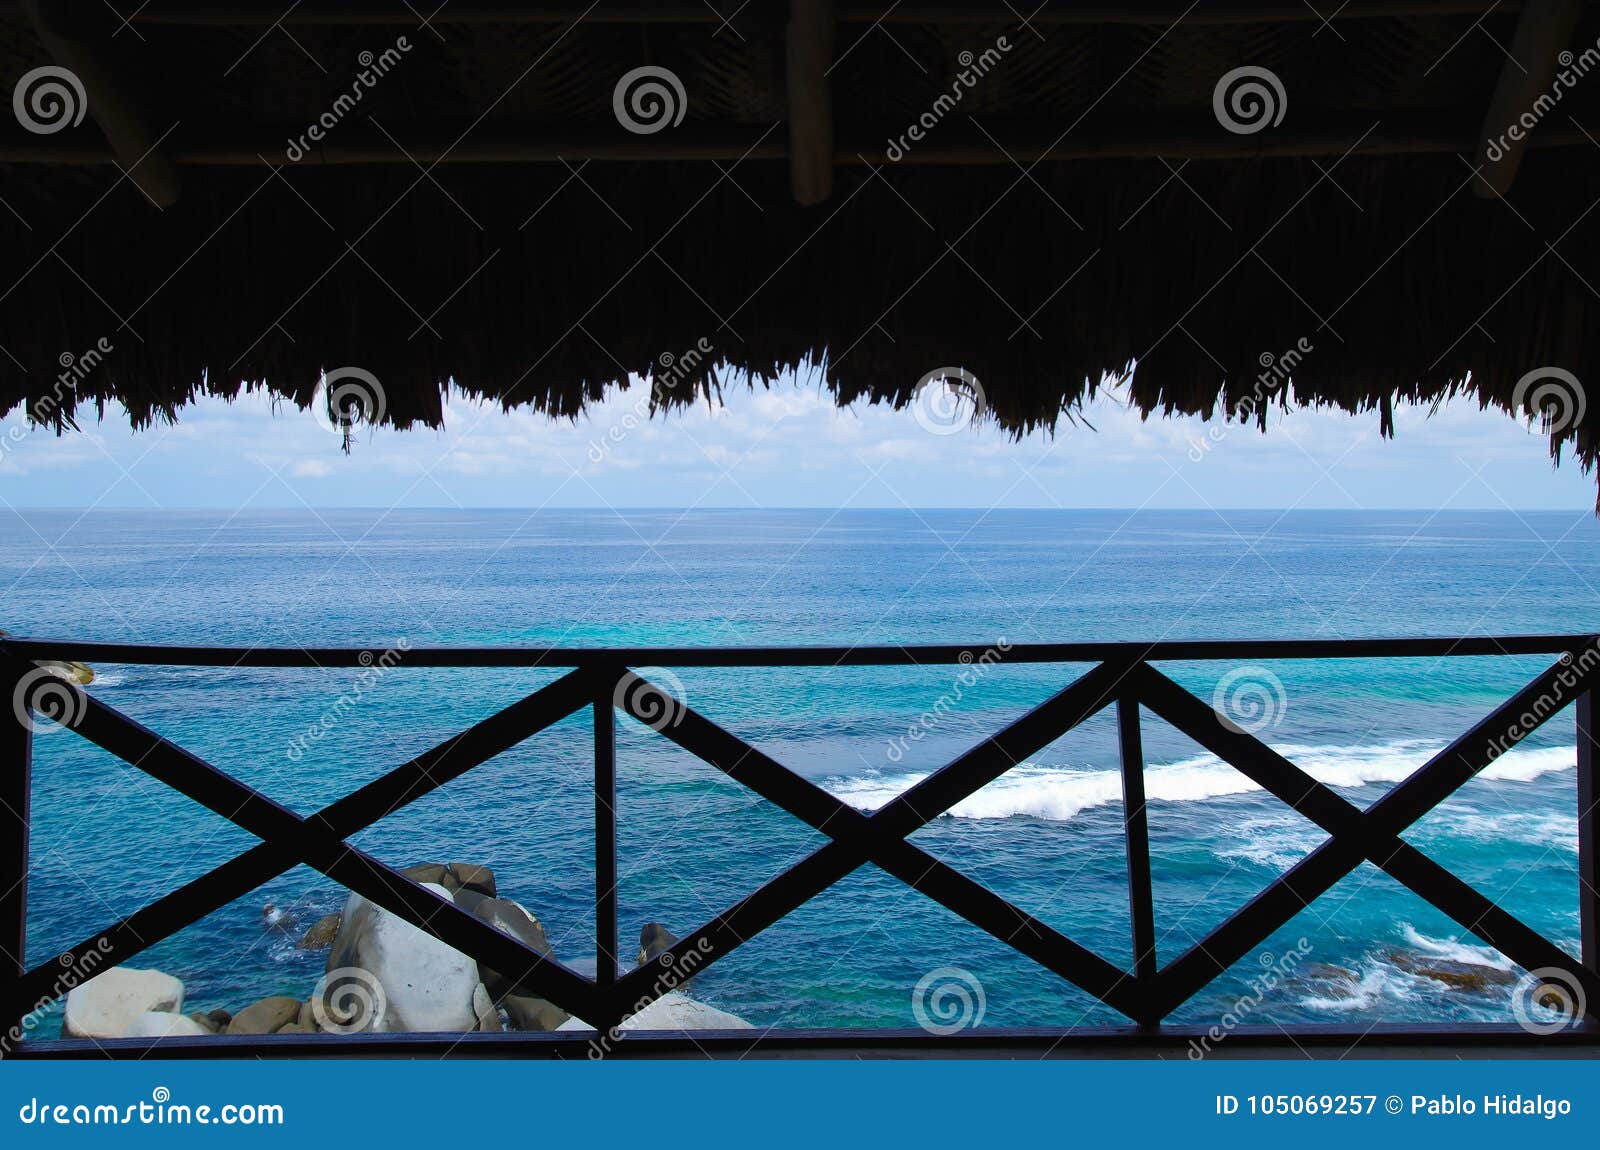 beautiful outdoor view of a ocean seen from inside of a bungalow in tairona national park, colombia